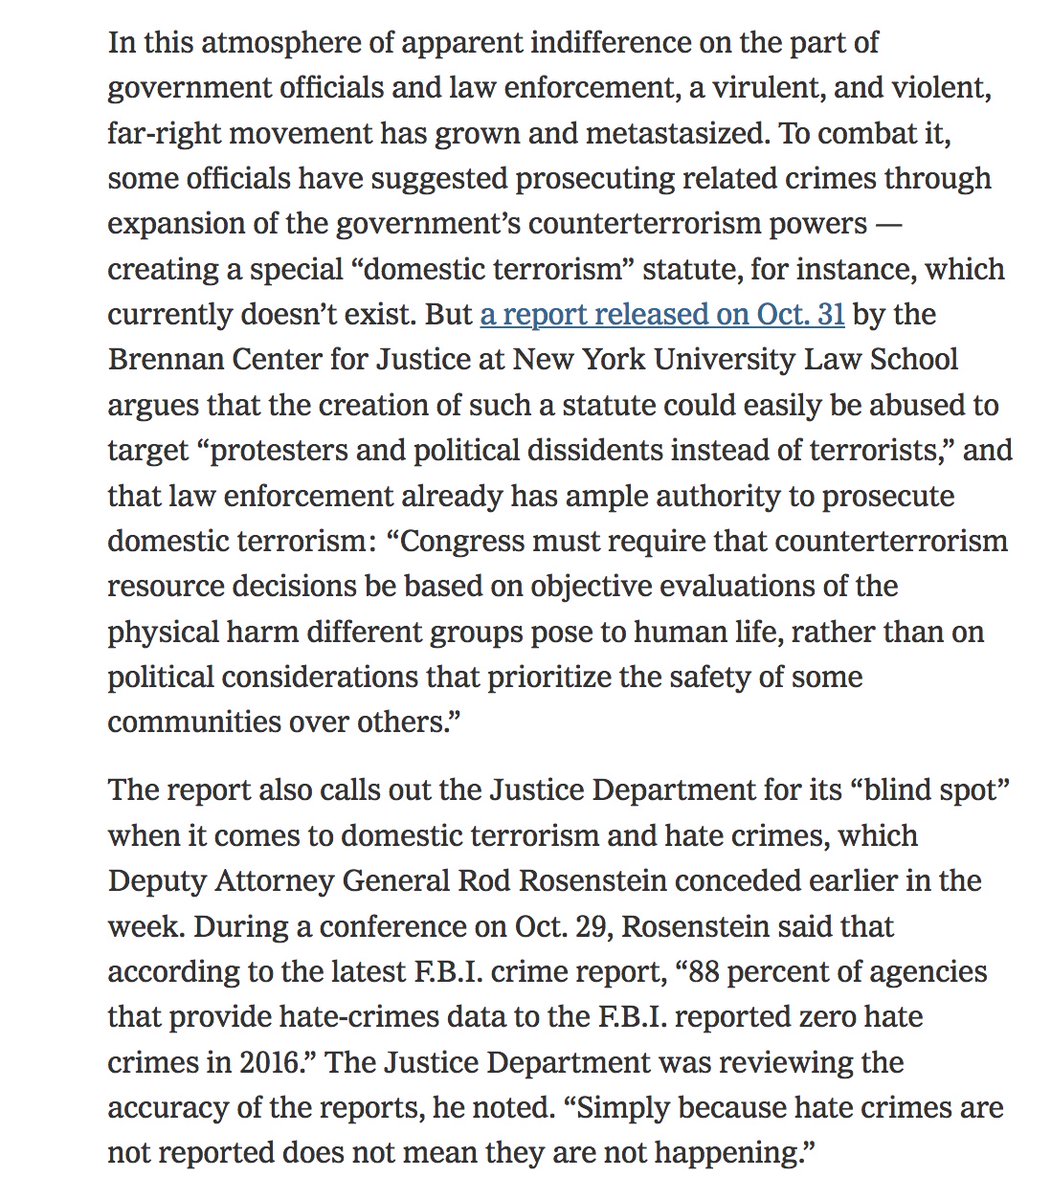 Given Trump's record of illiberalism, abuse of power, & demonstrated intent to criminalize dissent, Congress would be foolish to pass new domestic terrorism law.But it should hold open hearings on whether foreign or domestic extremists are deliberately stoking riots & fires.